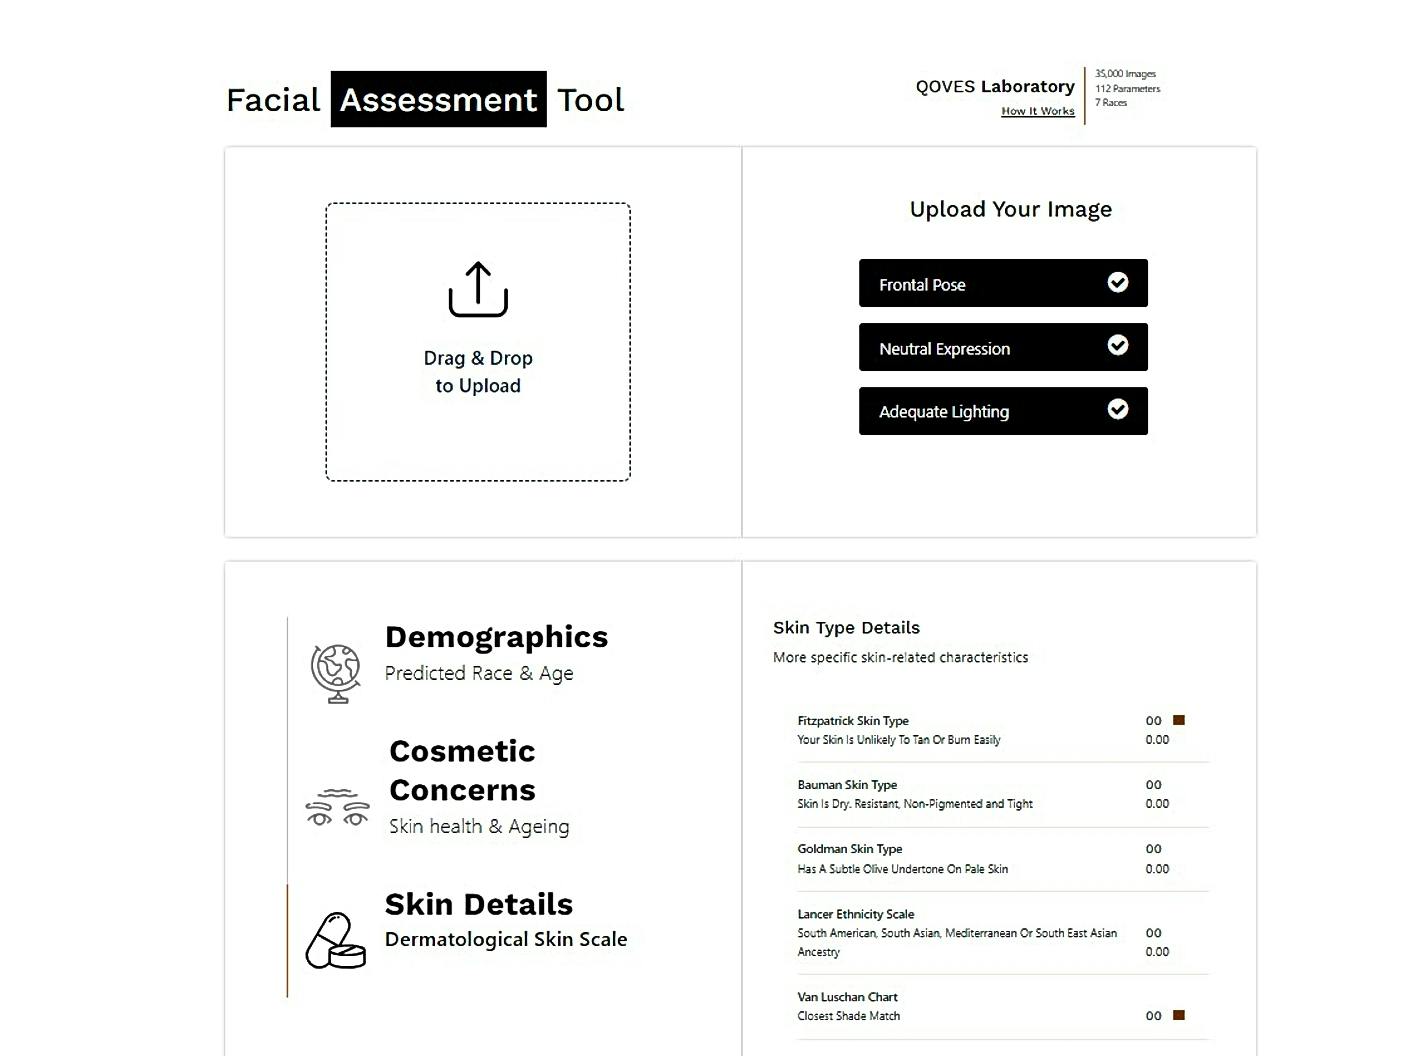 Facial Assessment Tool featured